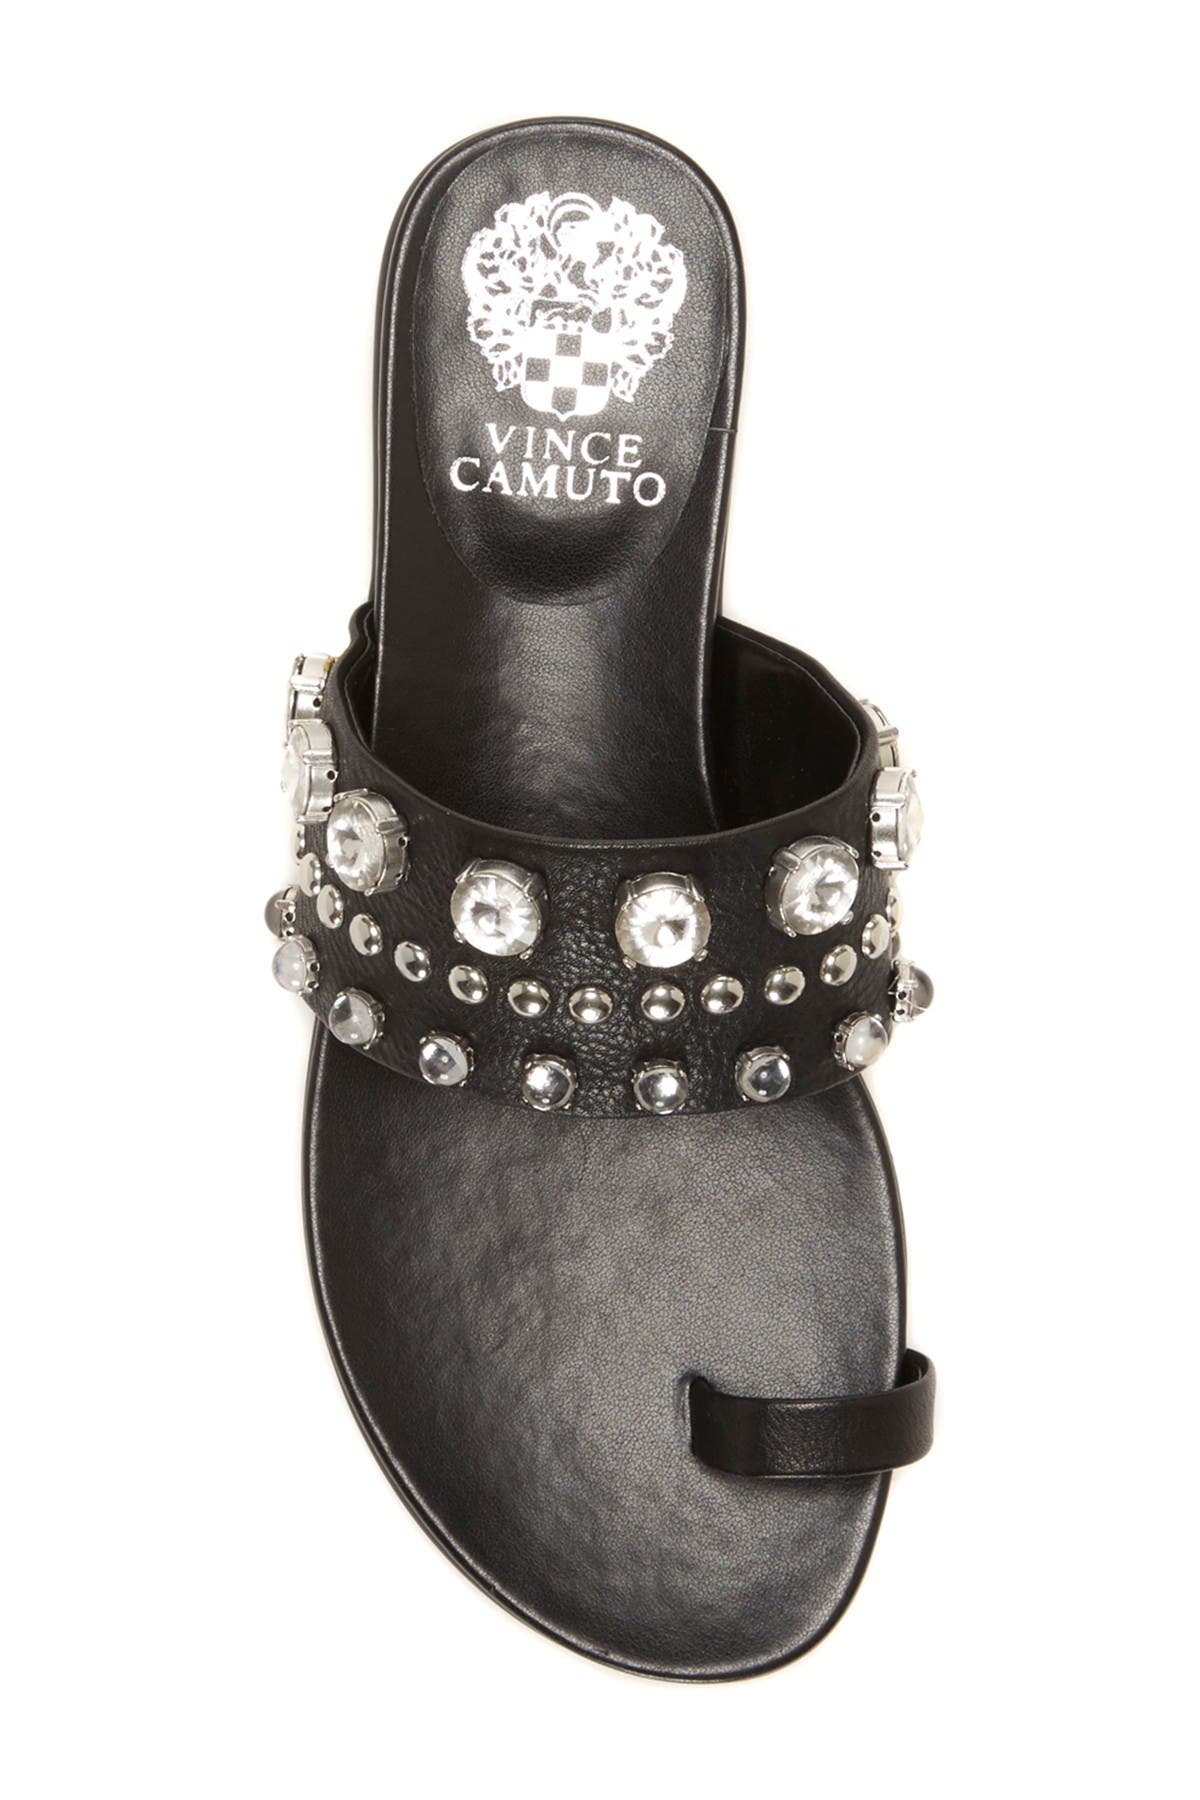 vince camuto emmerly